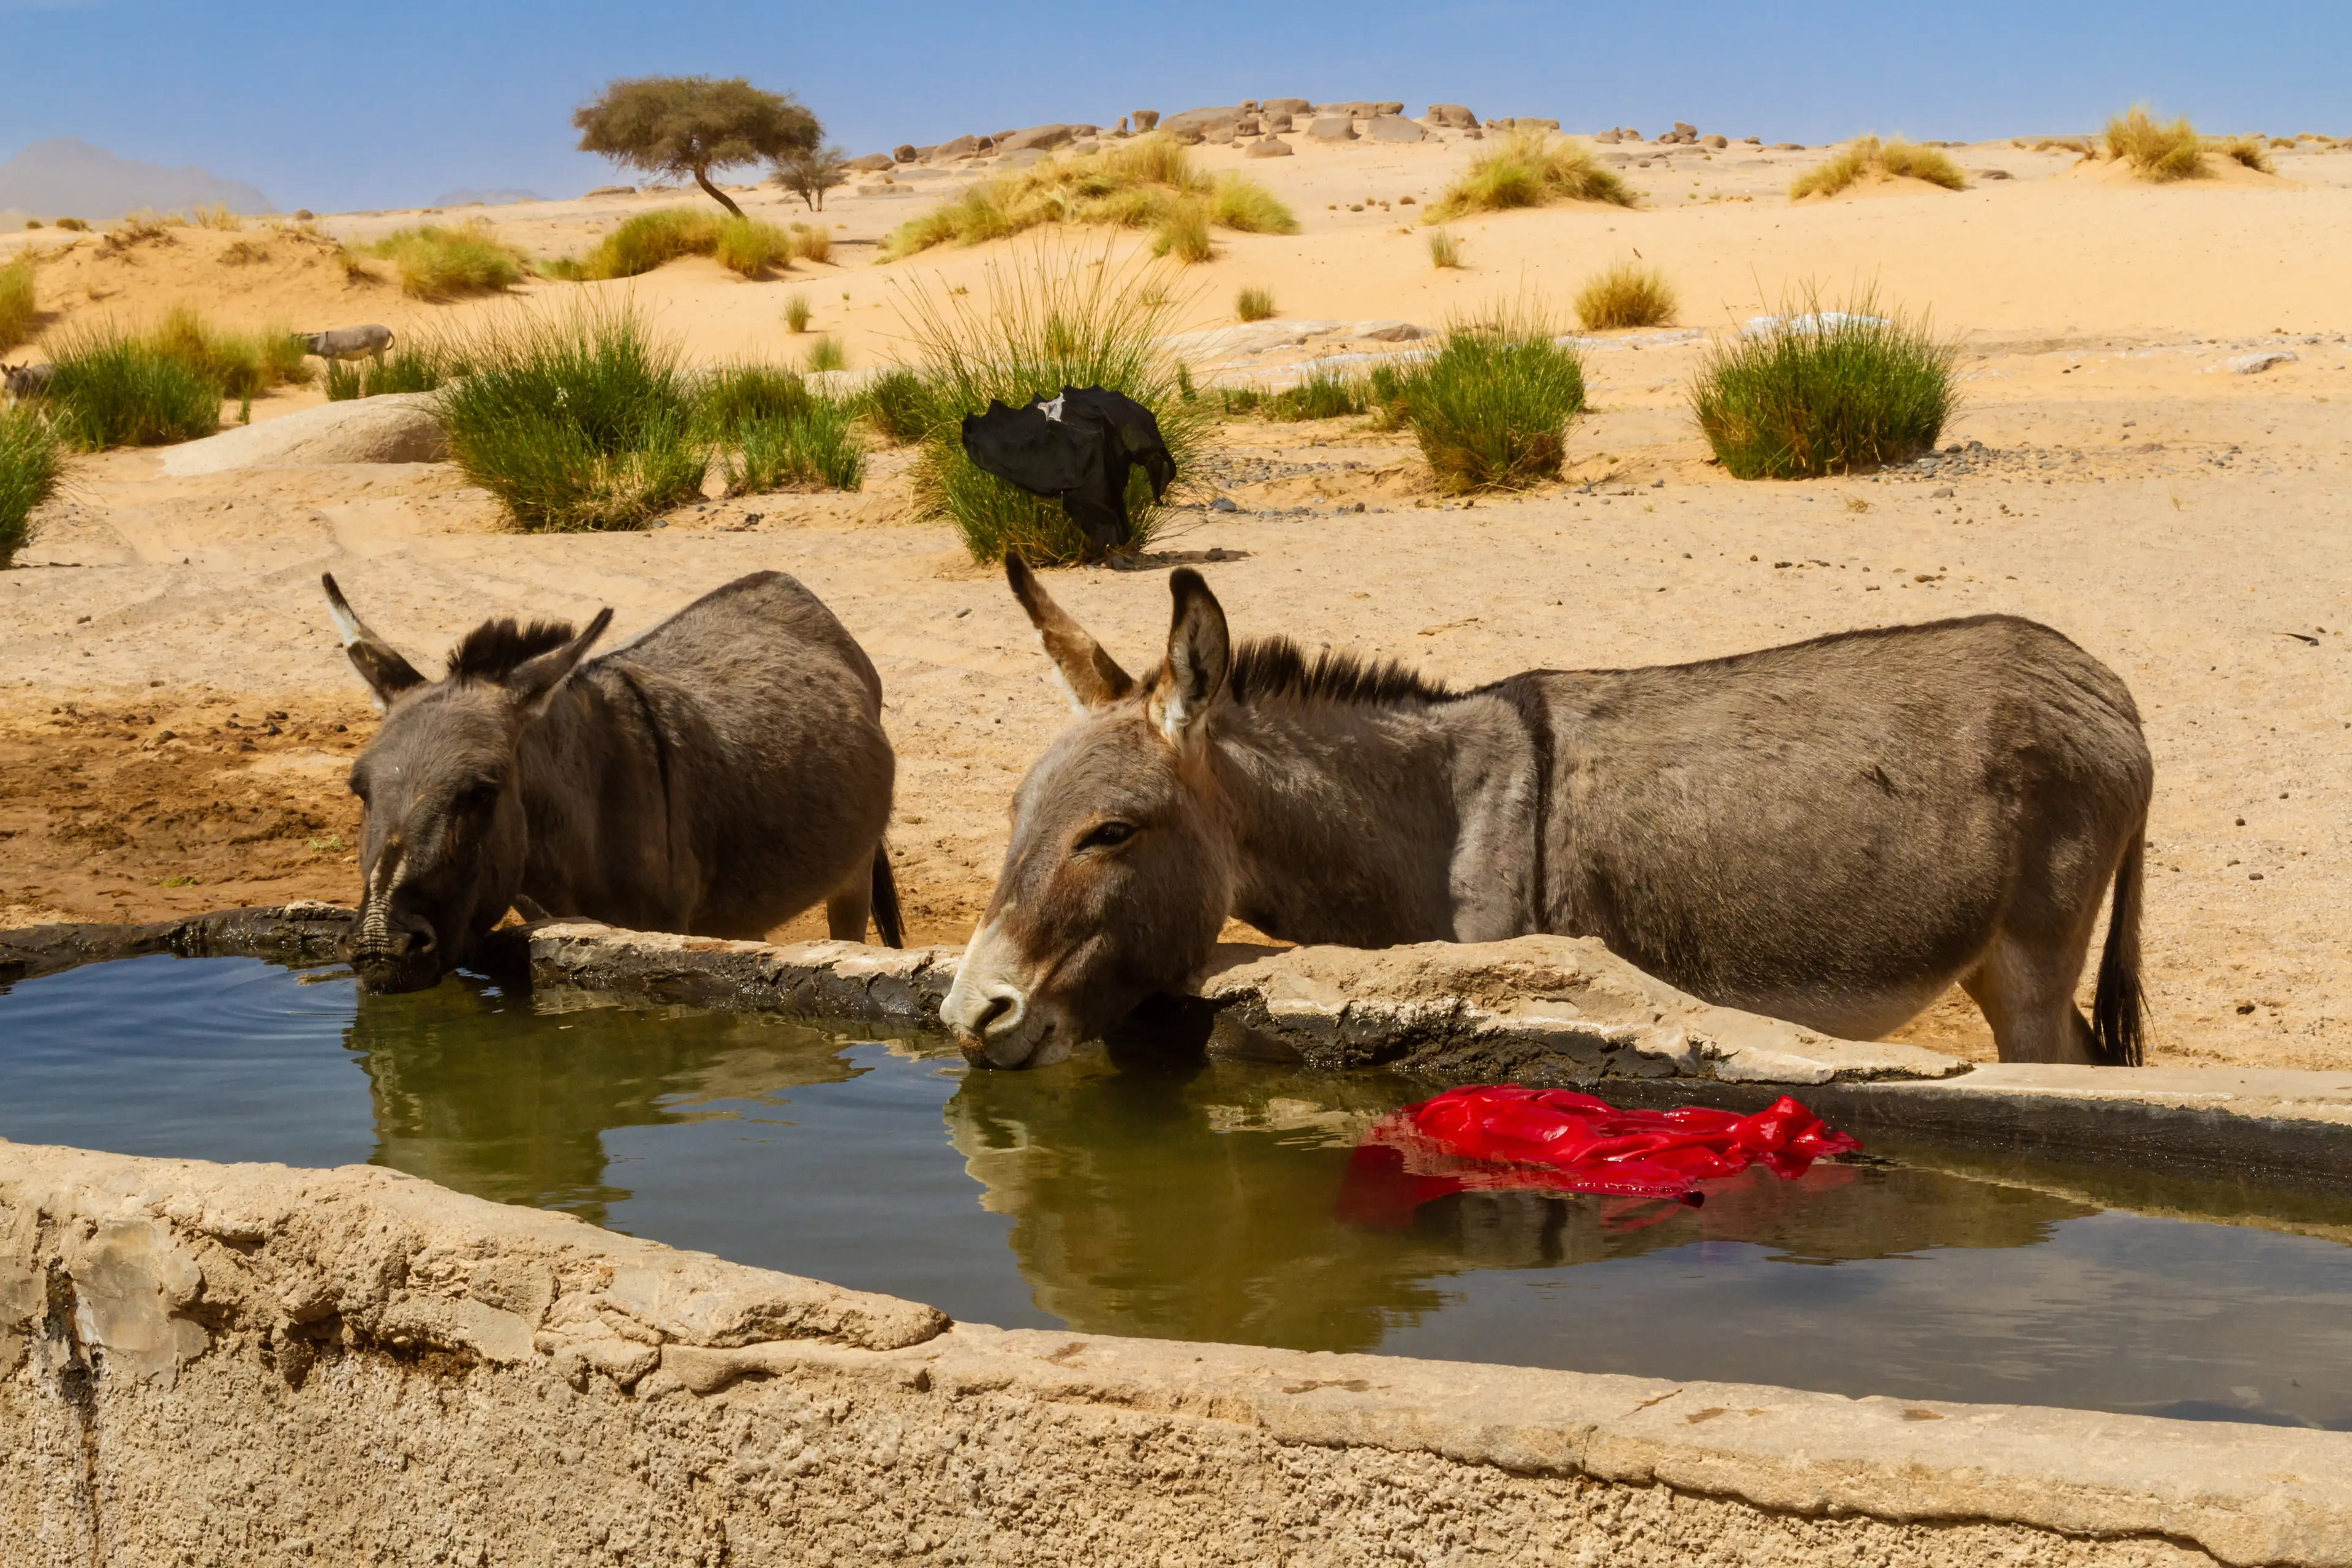 Donkeys drinking water from a stony water trough by the well in the Sahara desert.